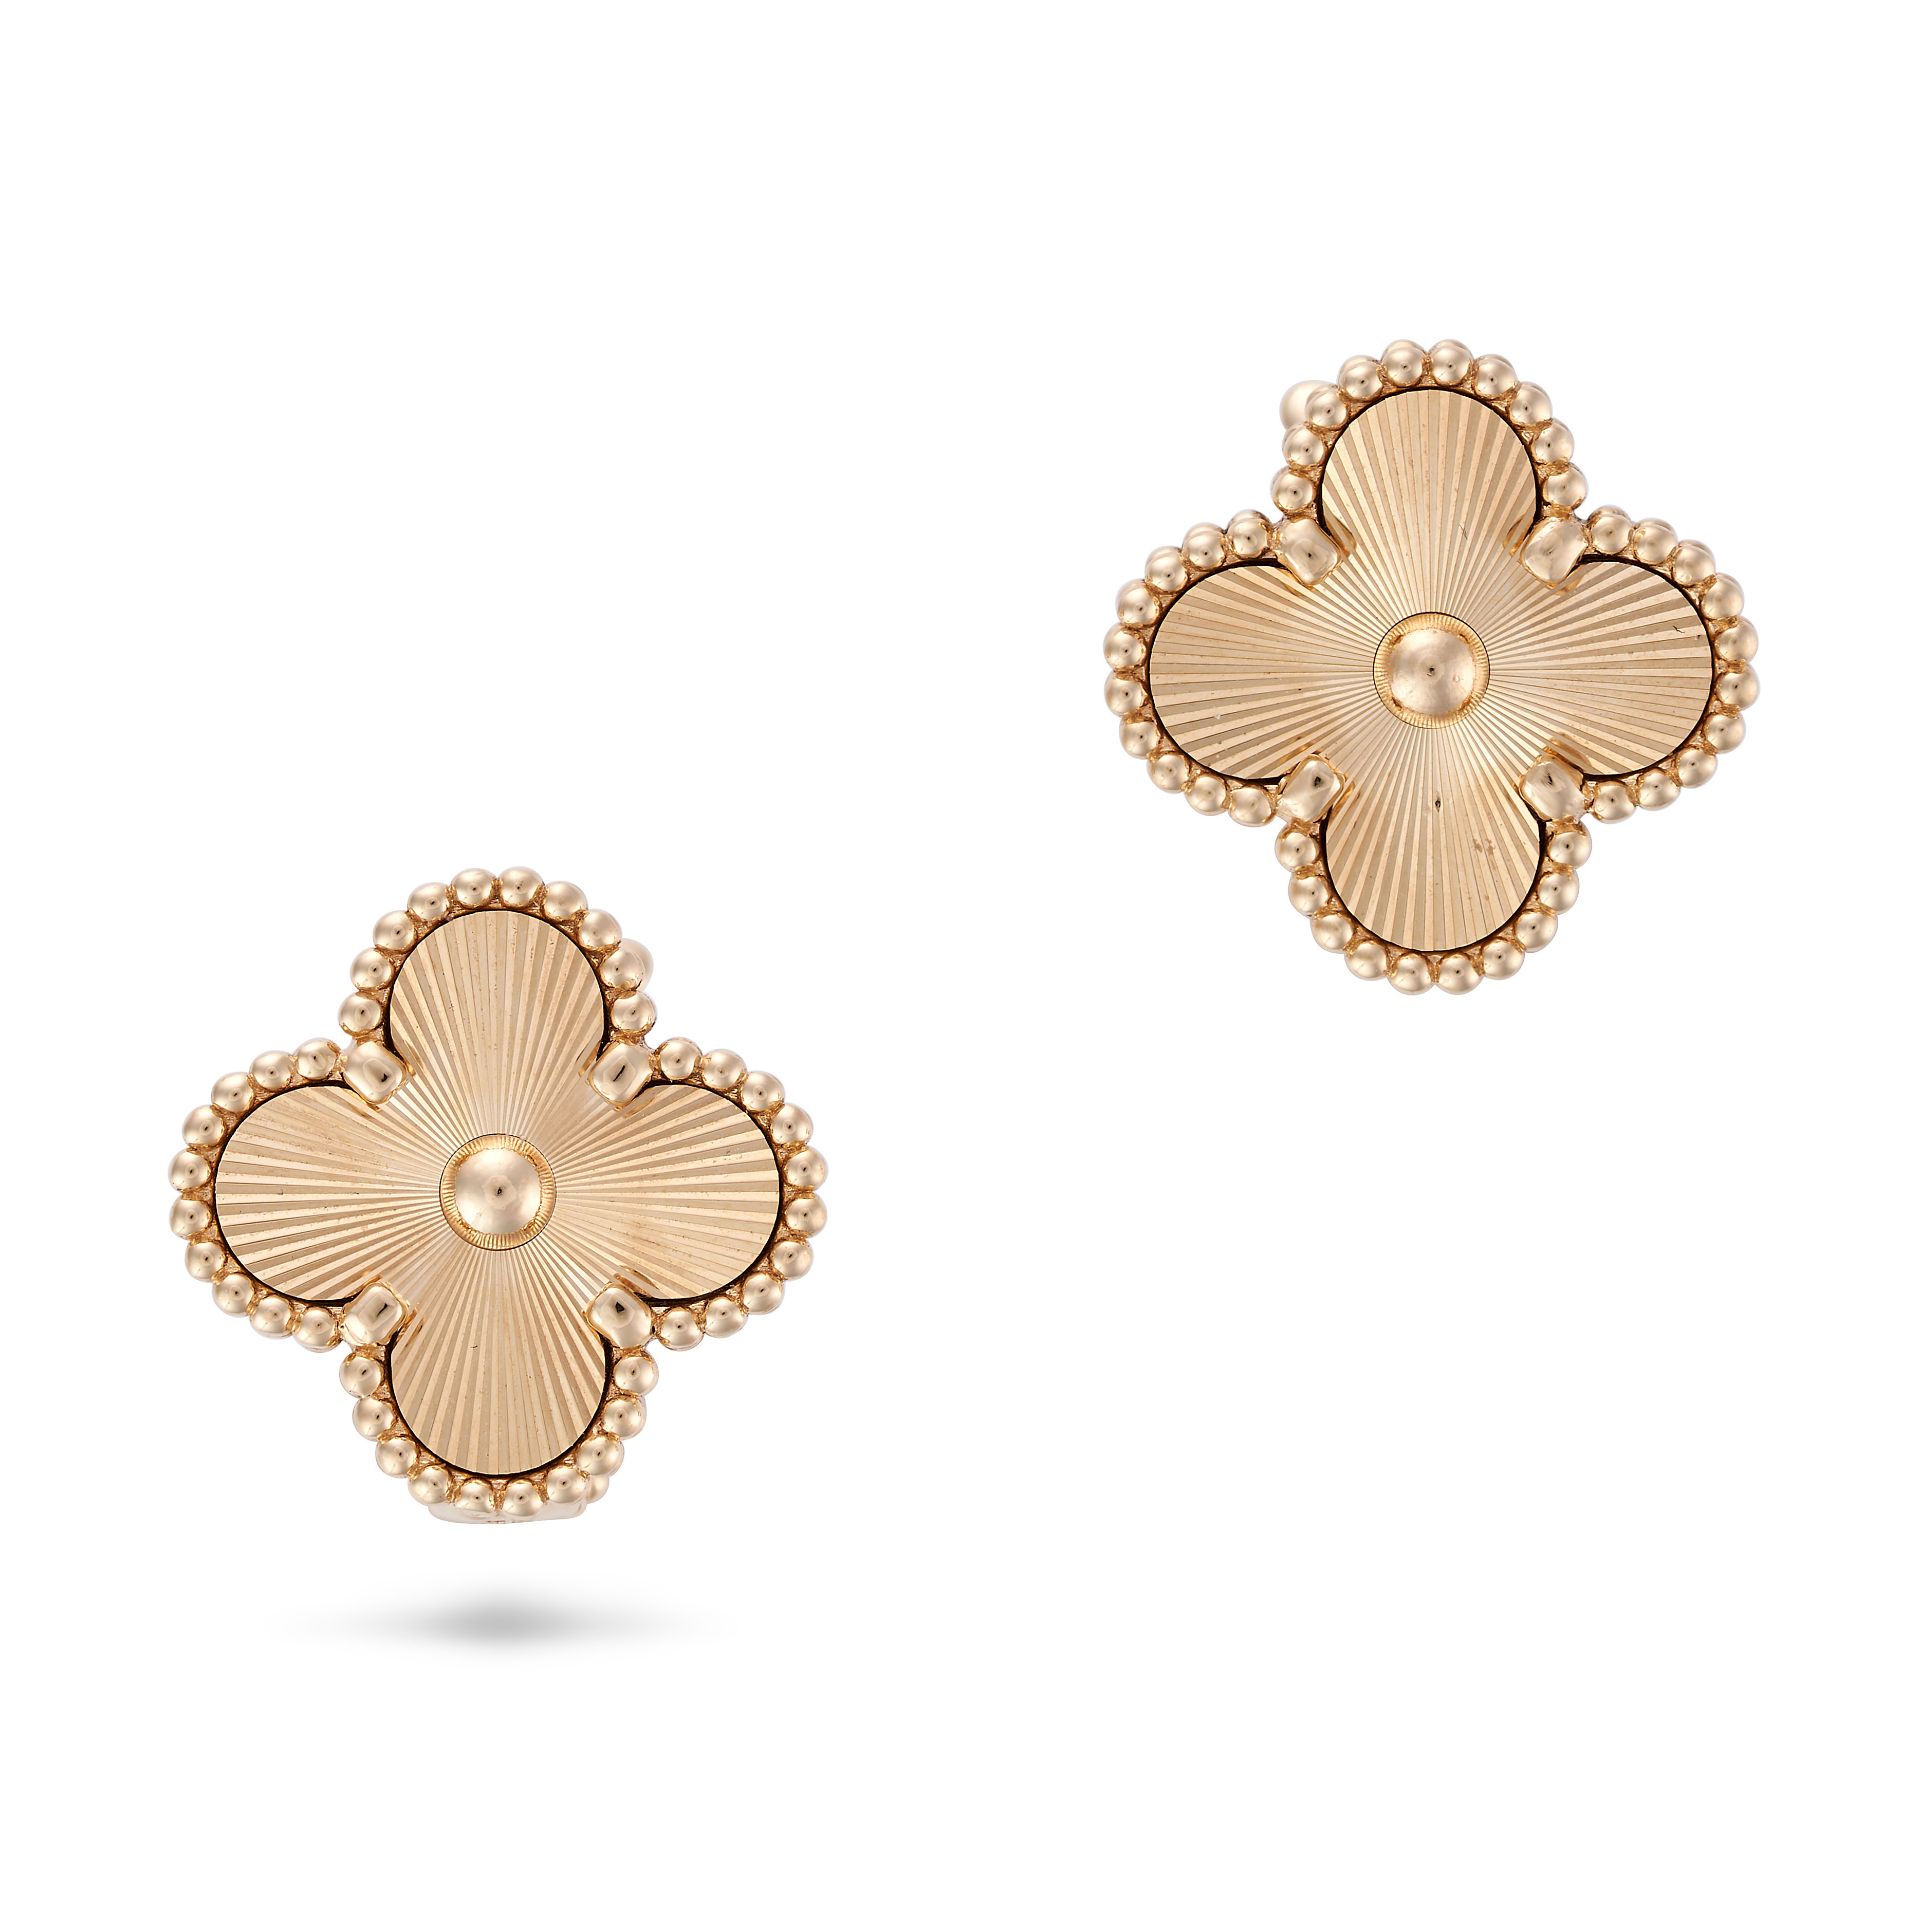 VAN CLEEF & ARPELS, A PAIR OF VINTAGE ALHAMBRA EARRINGS in 18ct yellow gold, each comprising a qu...